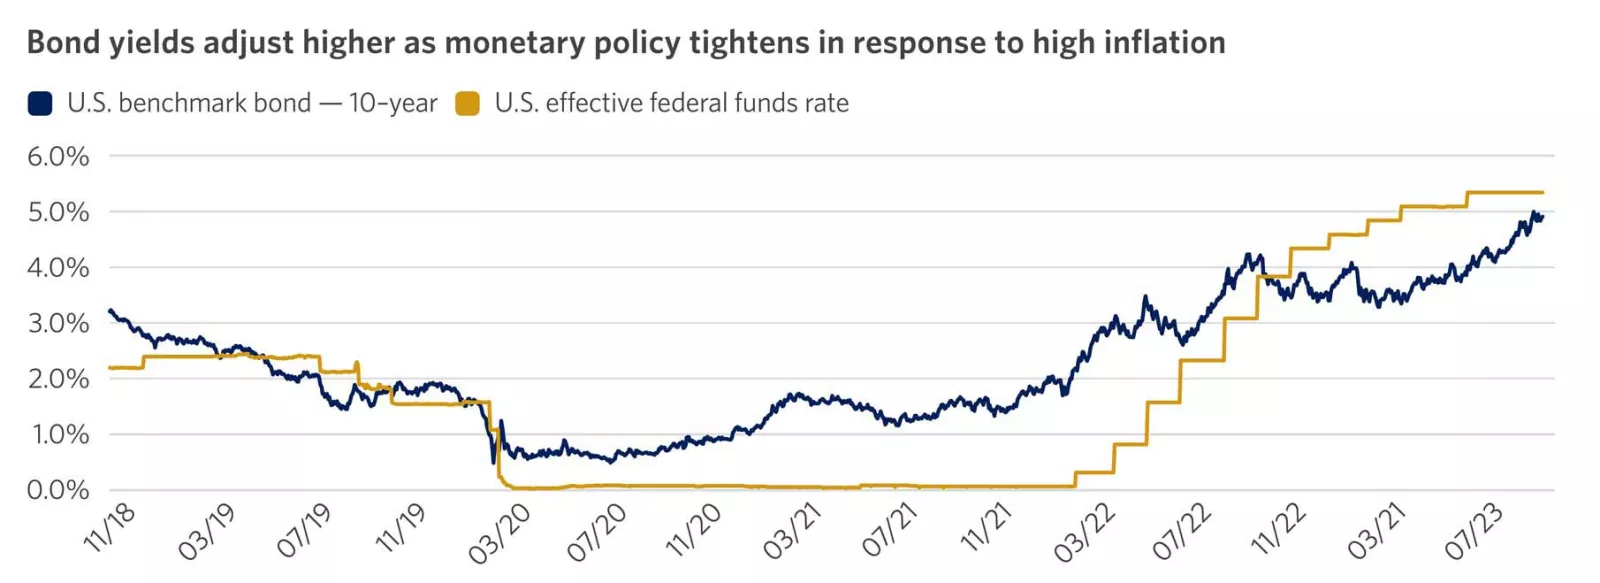  The graph shows the shifting Fed policy and the recent rise in the 10-year Treasury yield.
